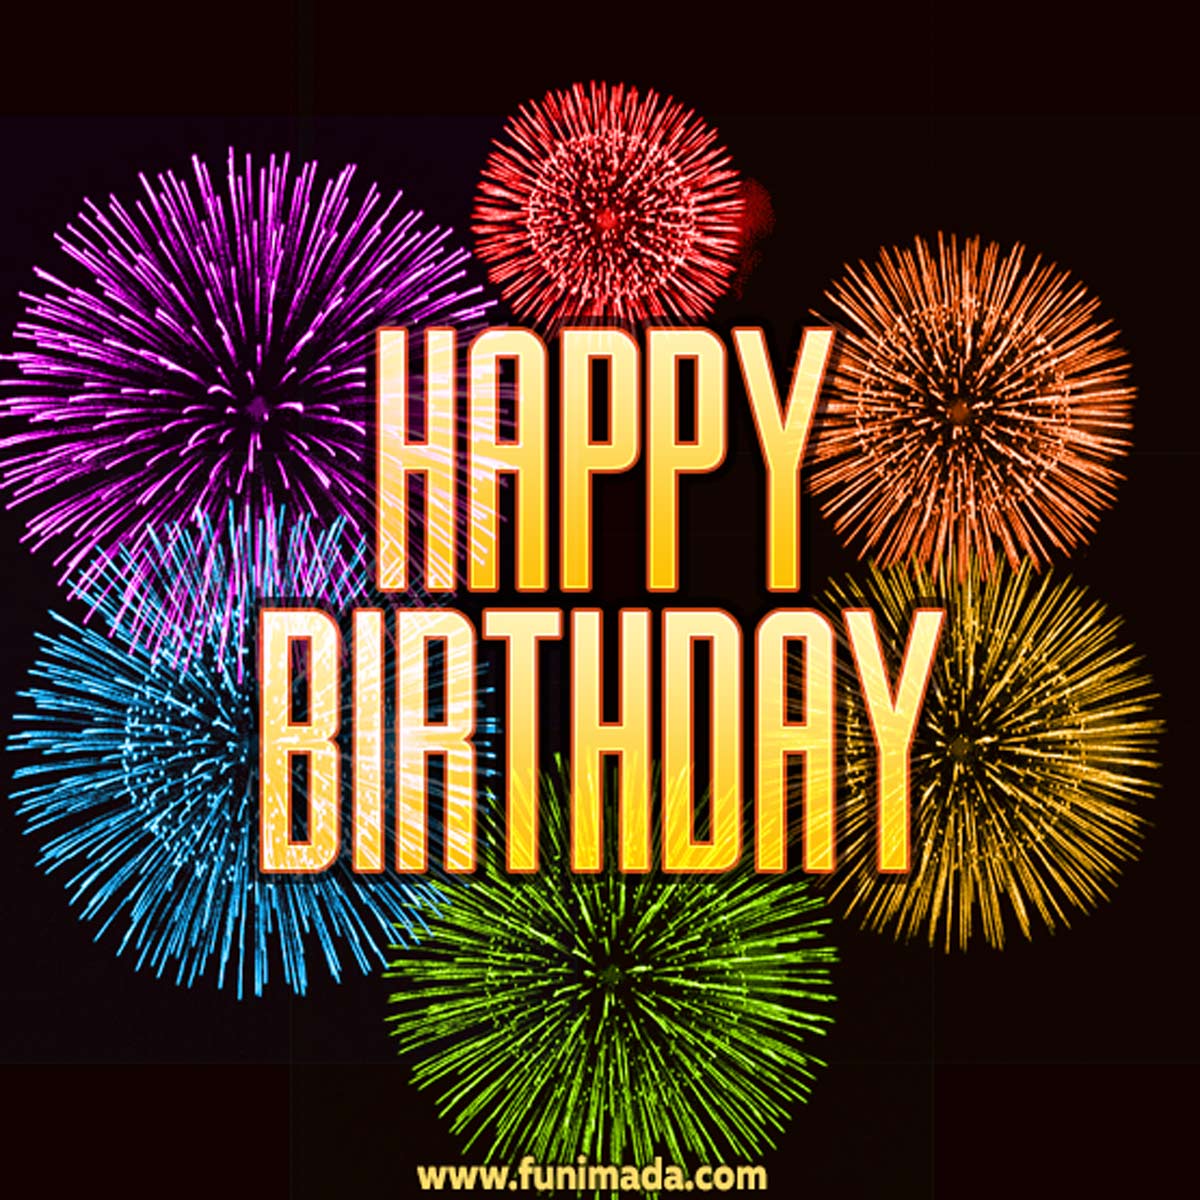 [New] Happy Birthday Animated (video) Greeting Card - Multicolored ...